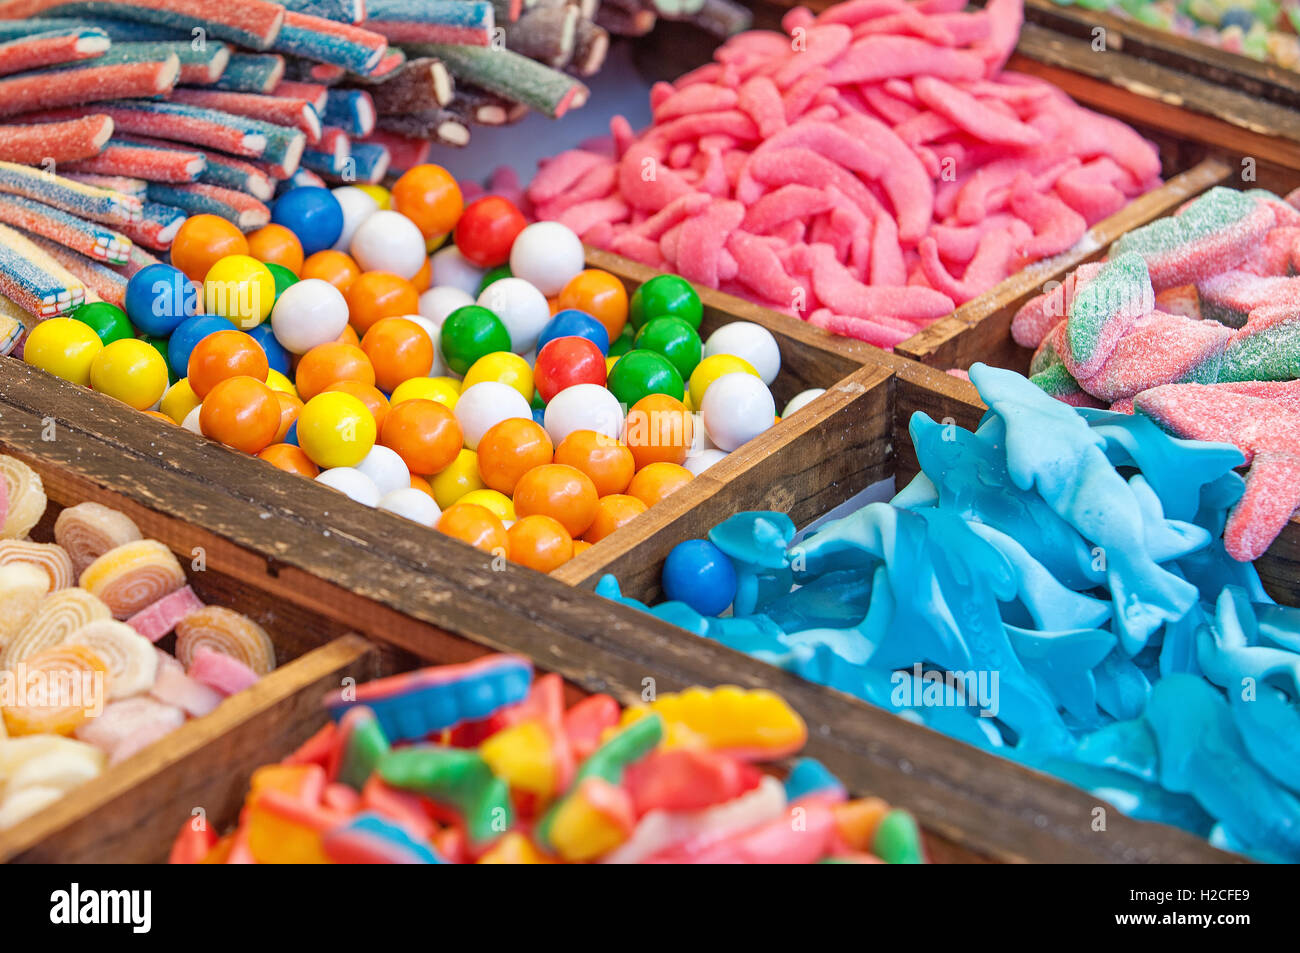 Colorful sweets, candied and jellies at street market stall Stock Photo